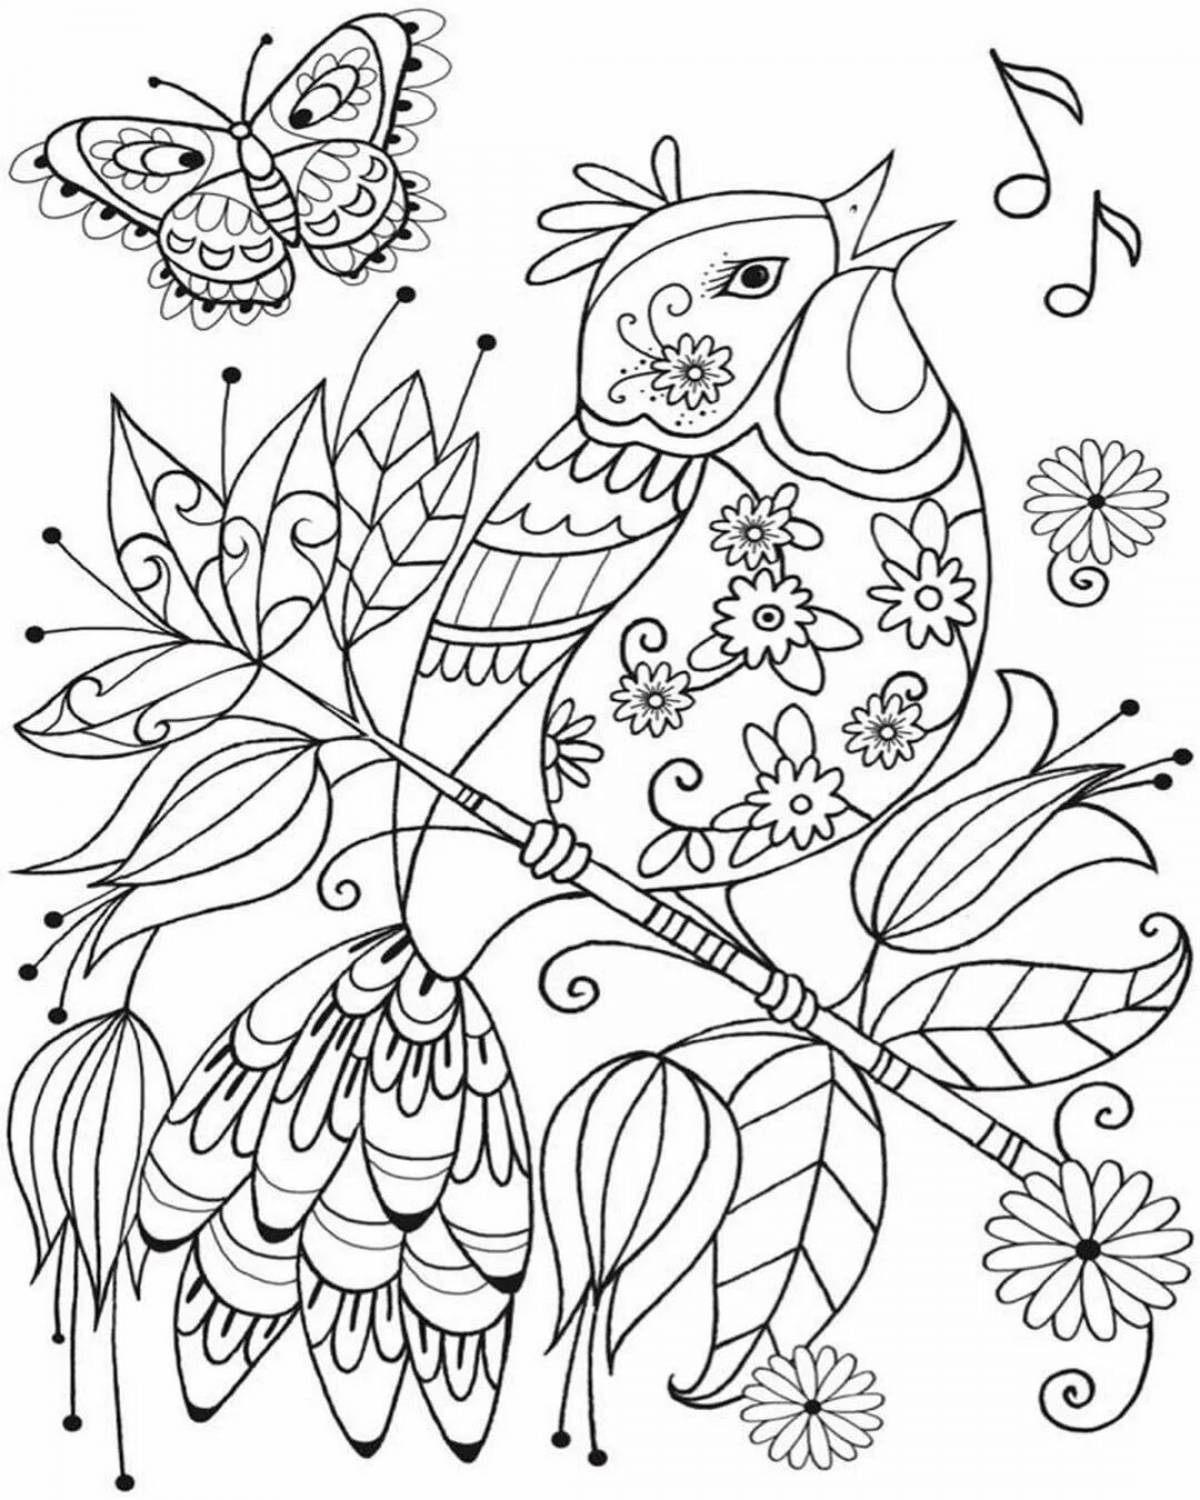 Glamor coloring for girls with birds